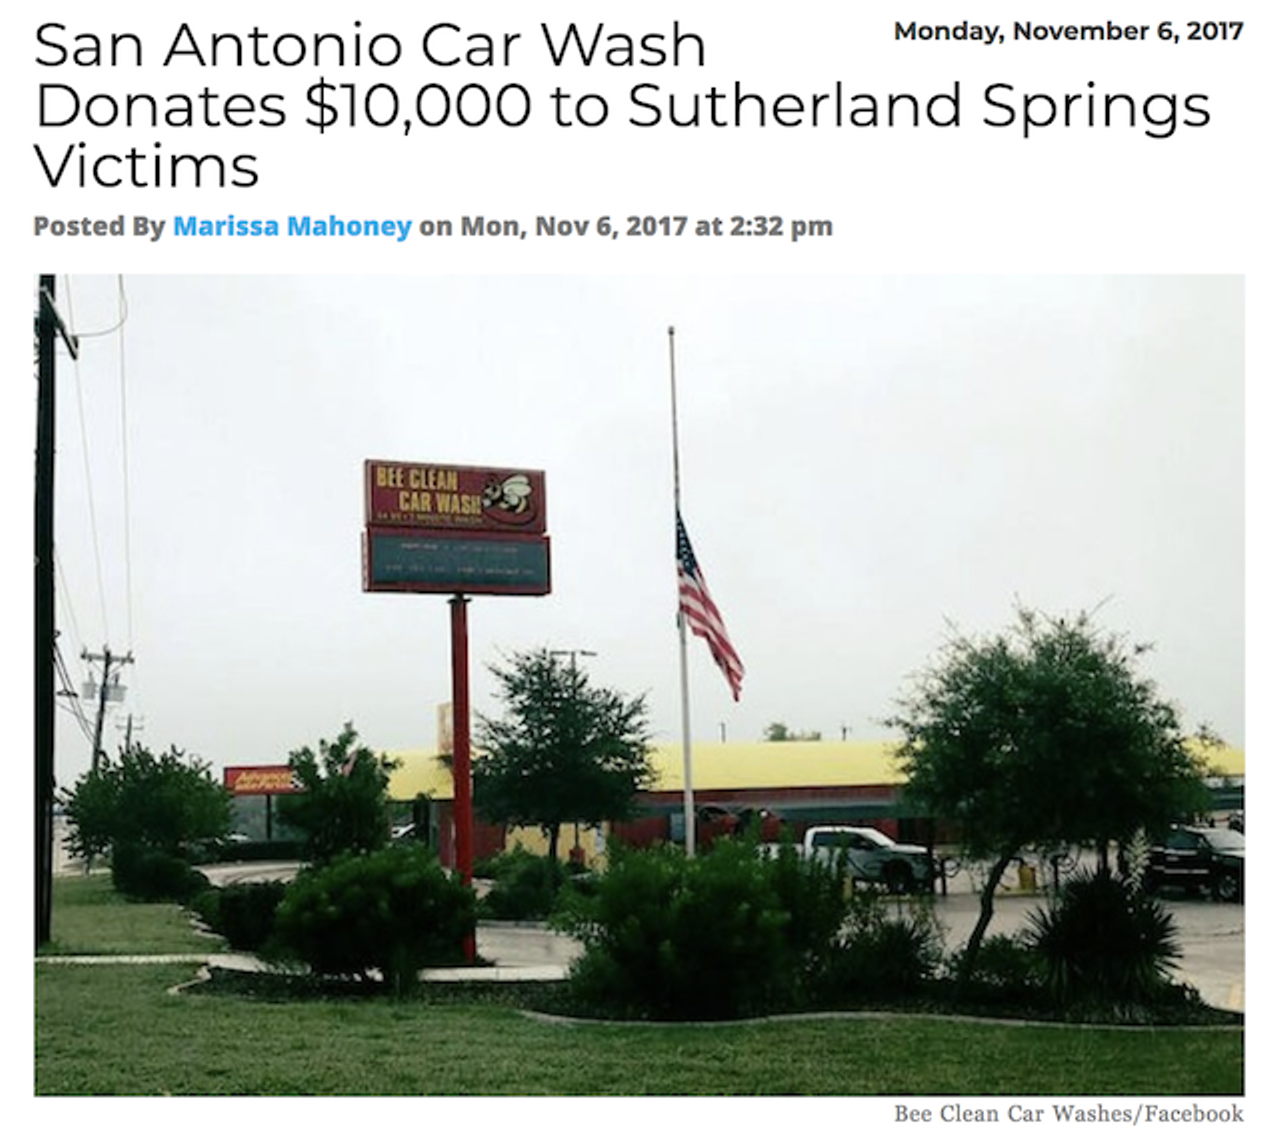 San Antonio’s Bee Clean Car Wash was the real MVP by donating $10,000 to the victims of the Sutherland Springs tragedy. Read more.